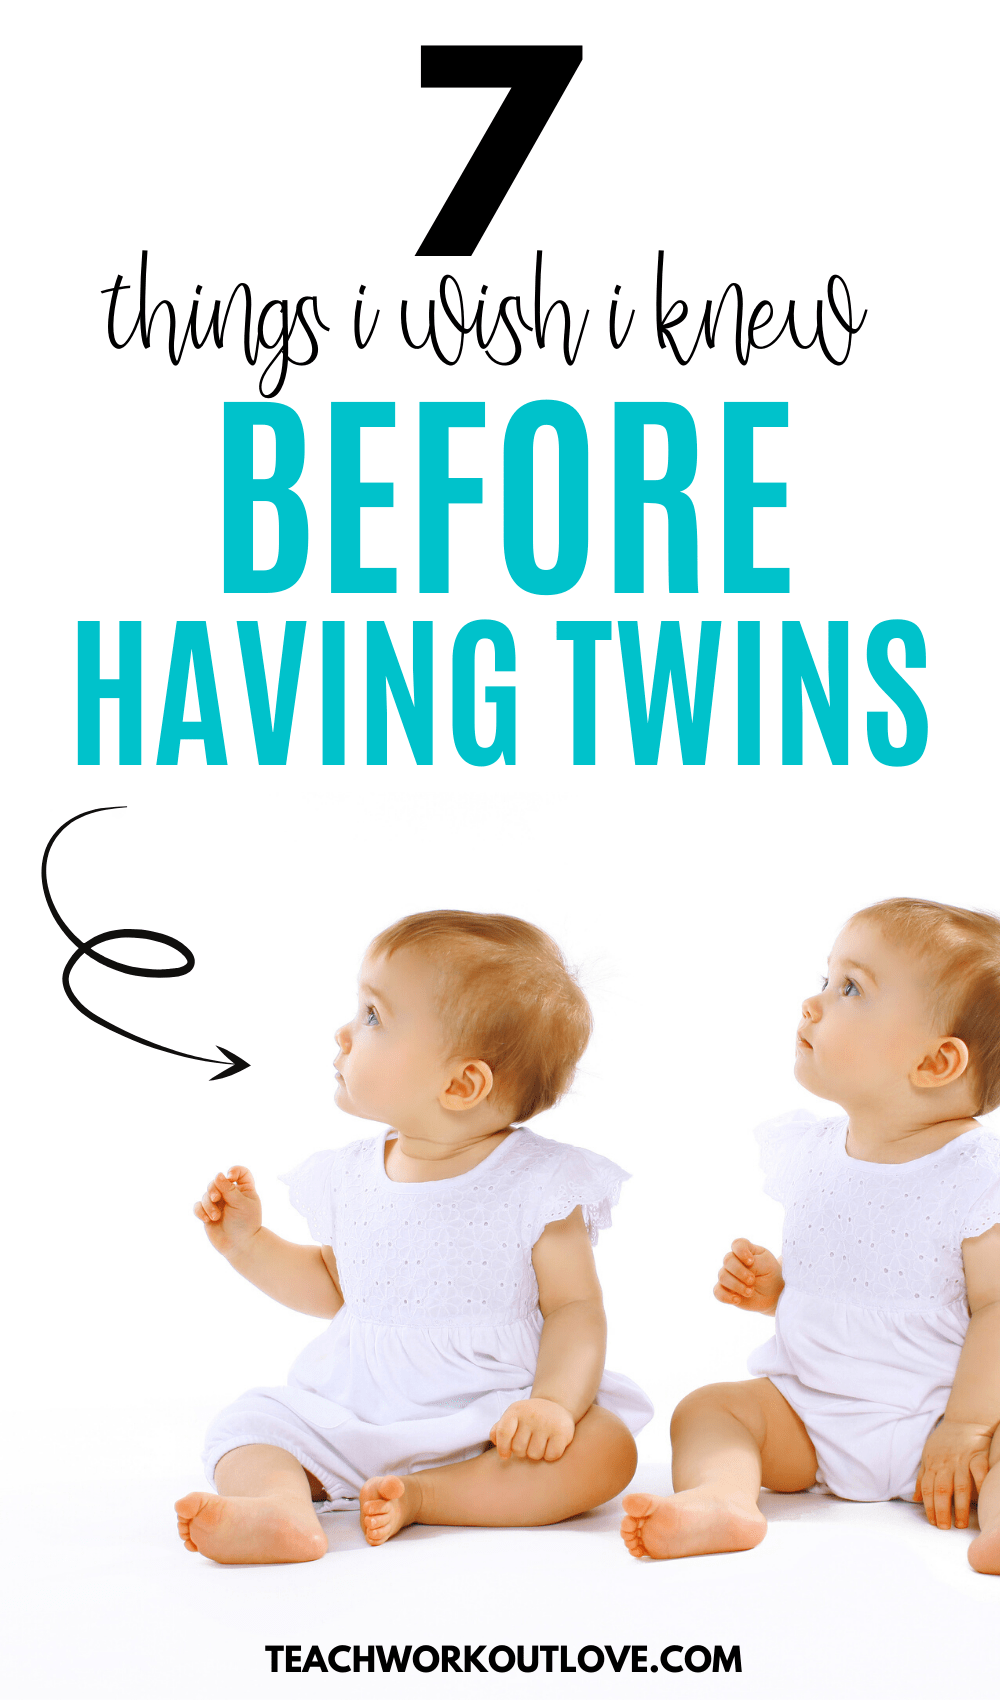 It’s really fascinating how two babies come into this world together. Read this article to learn what you should now before having twins.